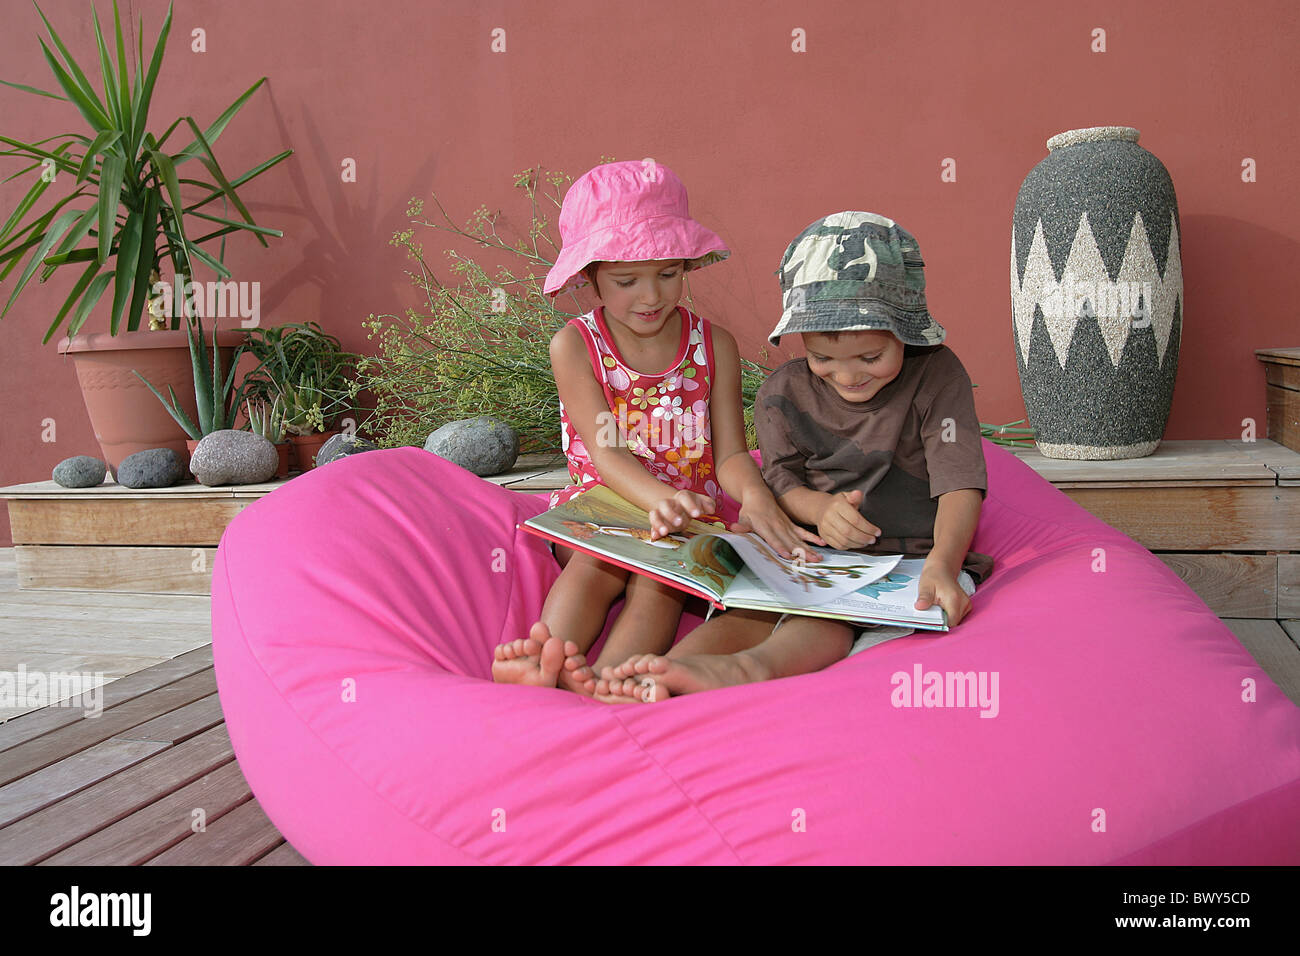 Two young child,brother and sister reading a book together on a pink pouf Stock Photo